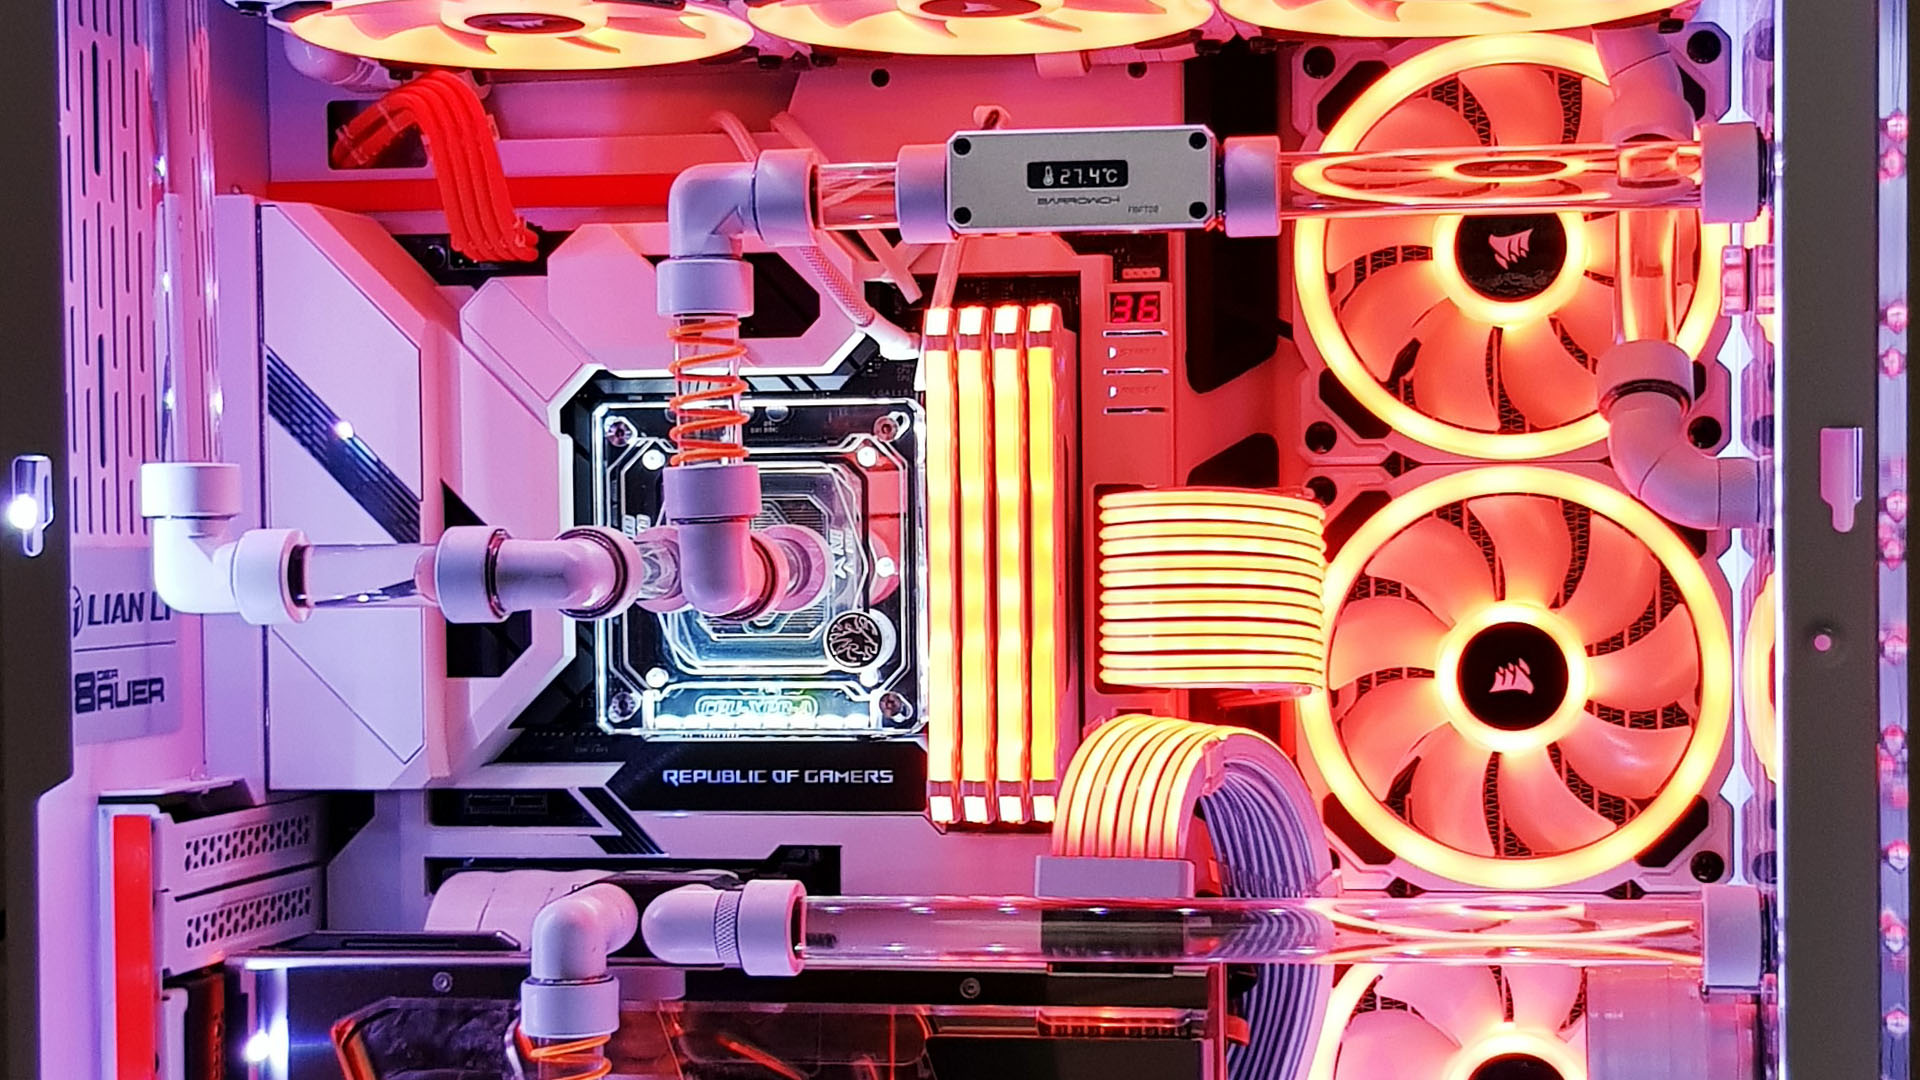 A Star Wars gaming PC which has custom water-cooling and hard tubing